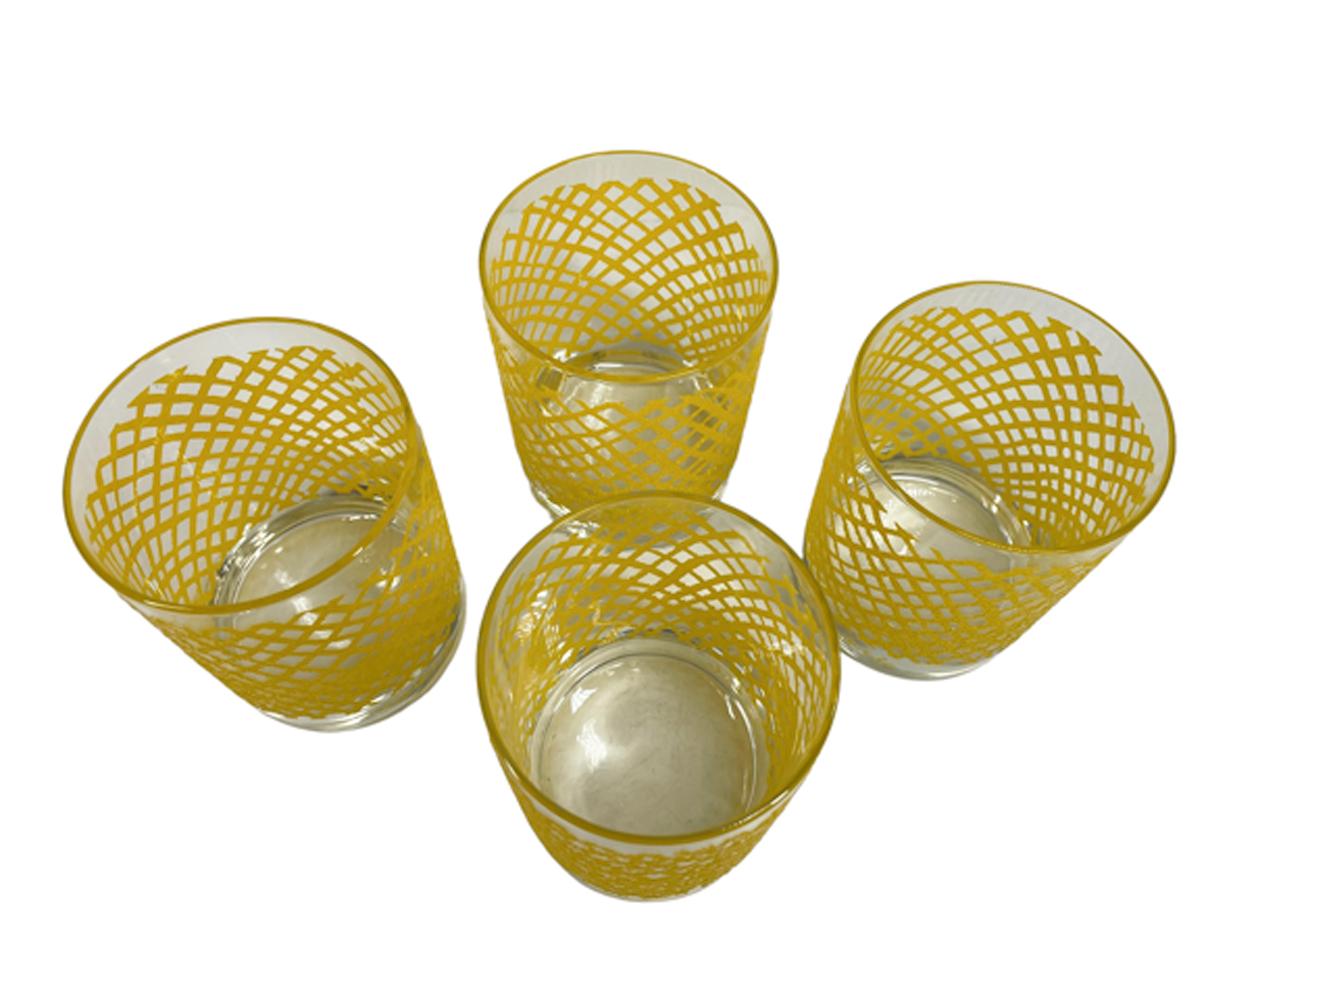 Set of 4 Vintage Georges Briard Rocks Glasses with a Raised Yellow Net Pattern In Good Condition For Sale In Chapel Hill, NC